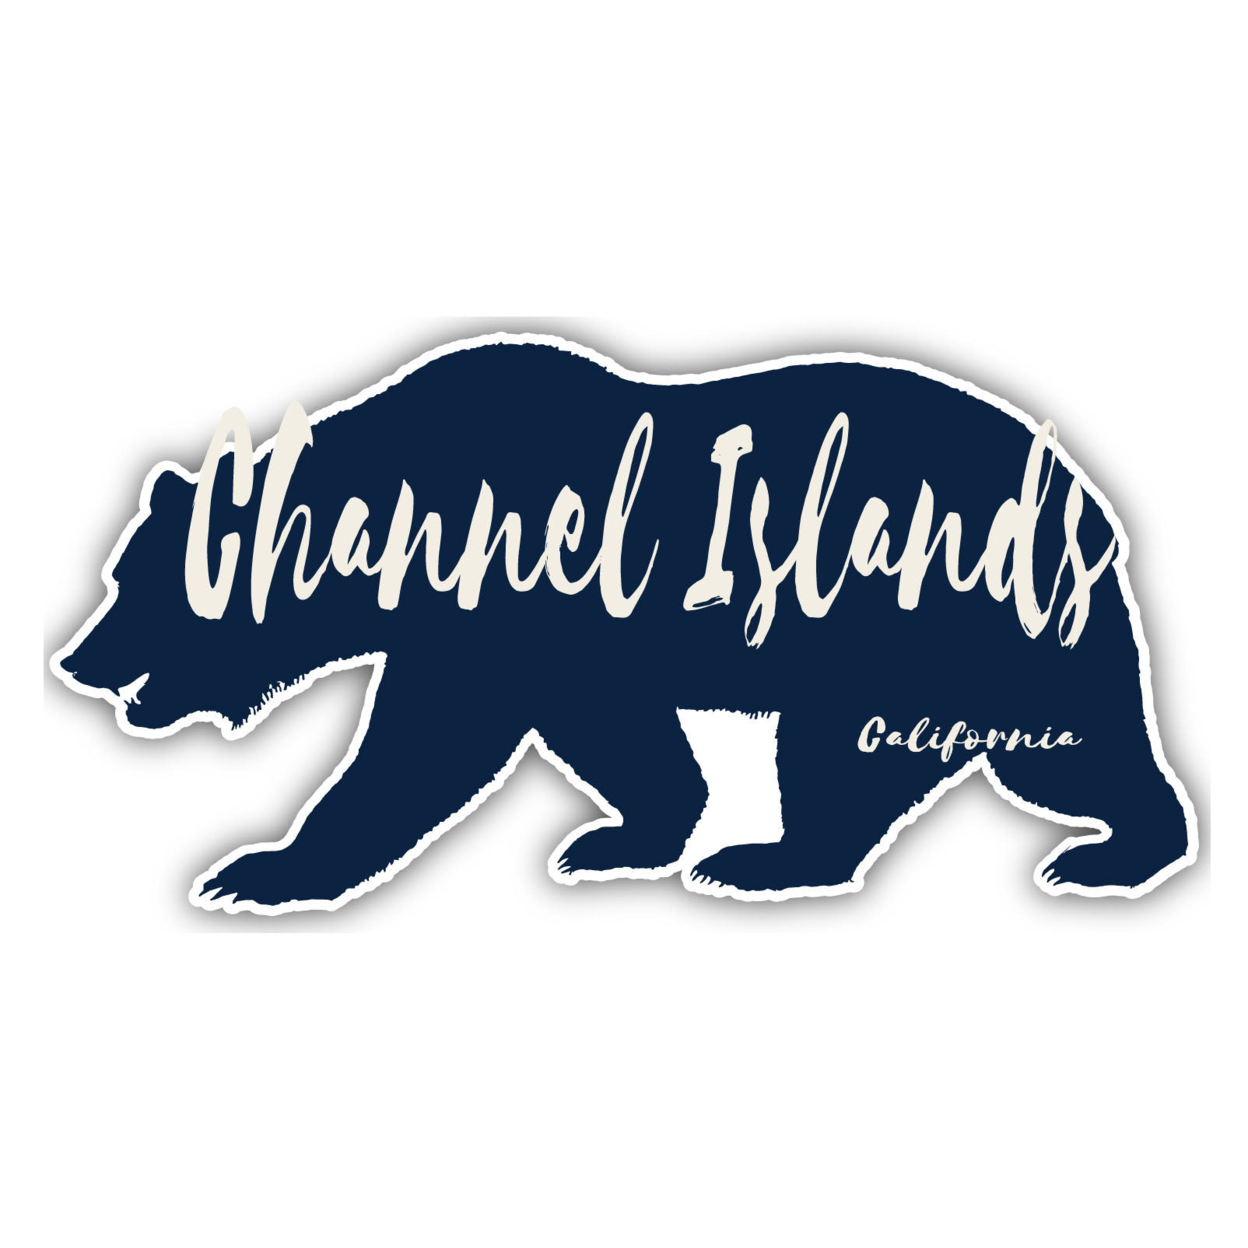 Channel Islands California Souvenir Decorative Stickers (Choose Theme And Size) - 4-Pack, 6-Inch, Bear